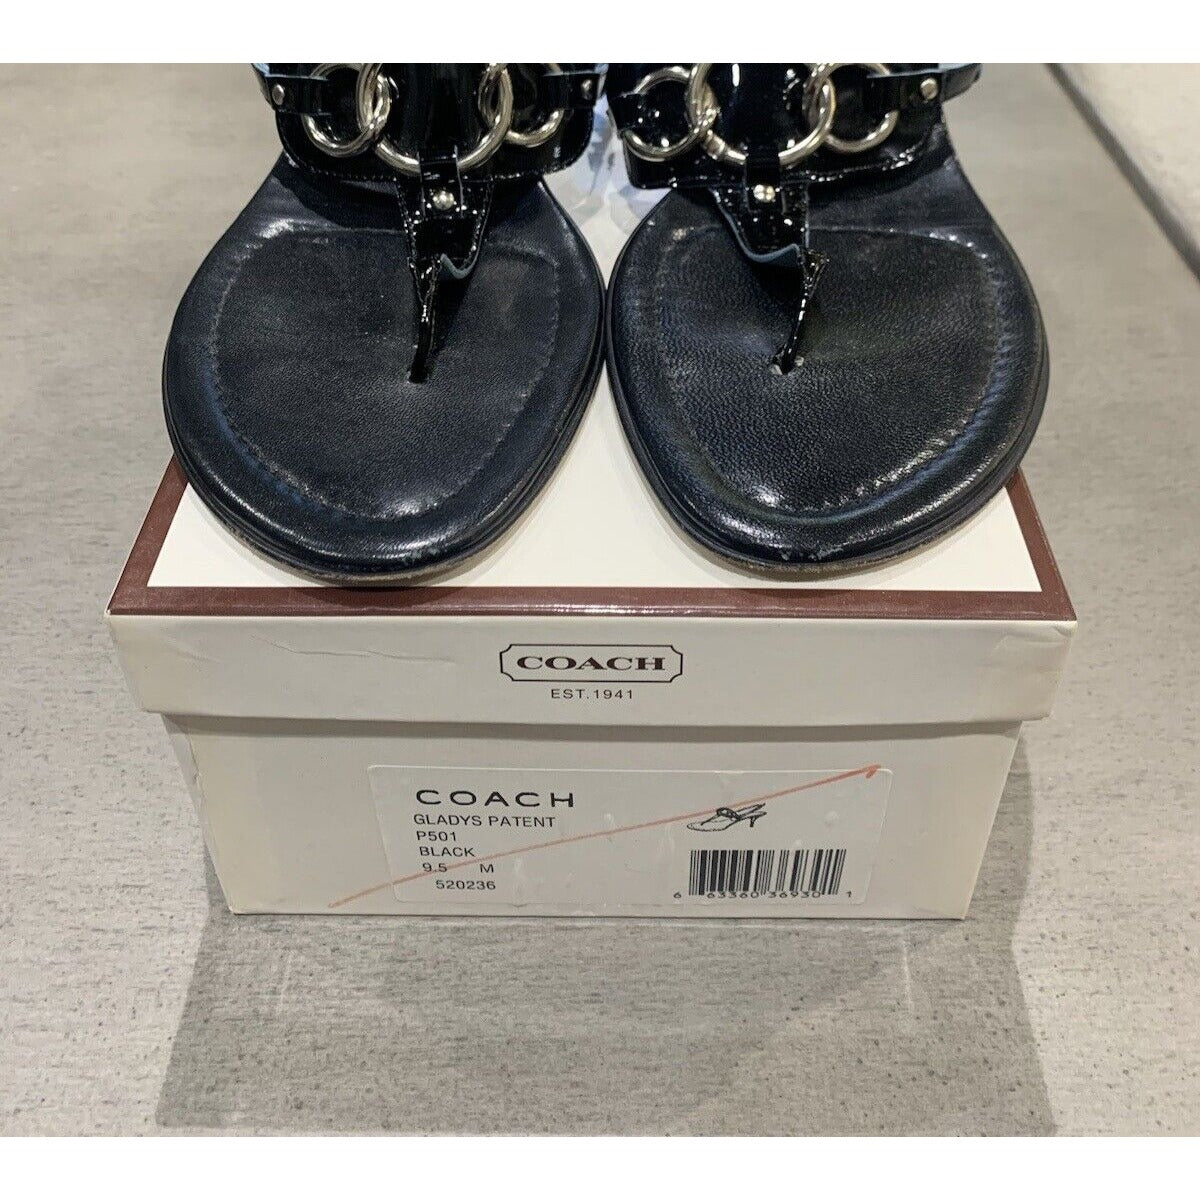 Coach Women's Gladys Patent Leather Thong Sandal with Ankle Strap